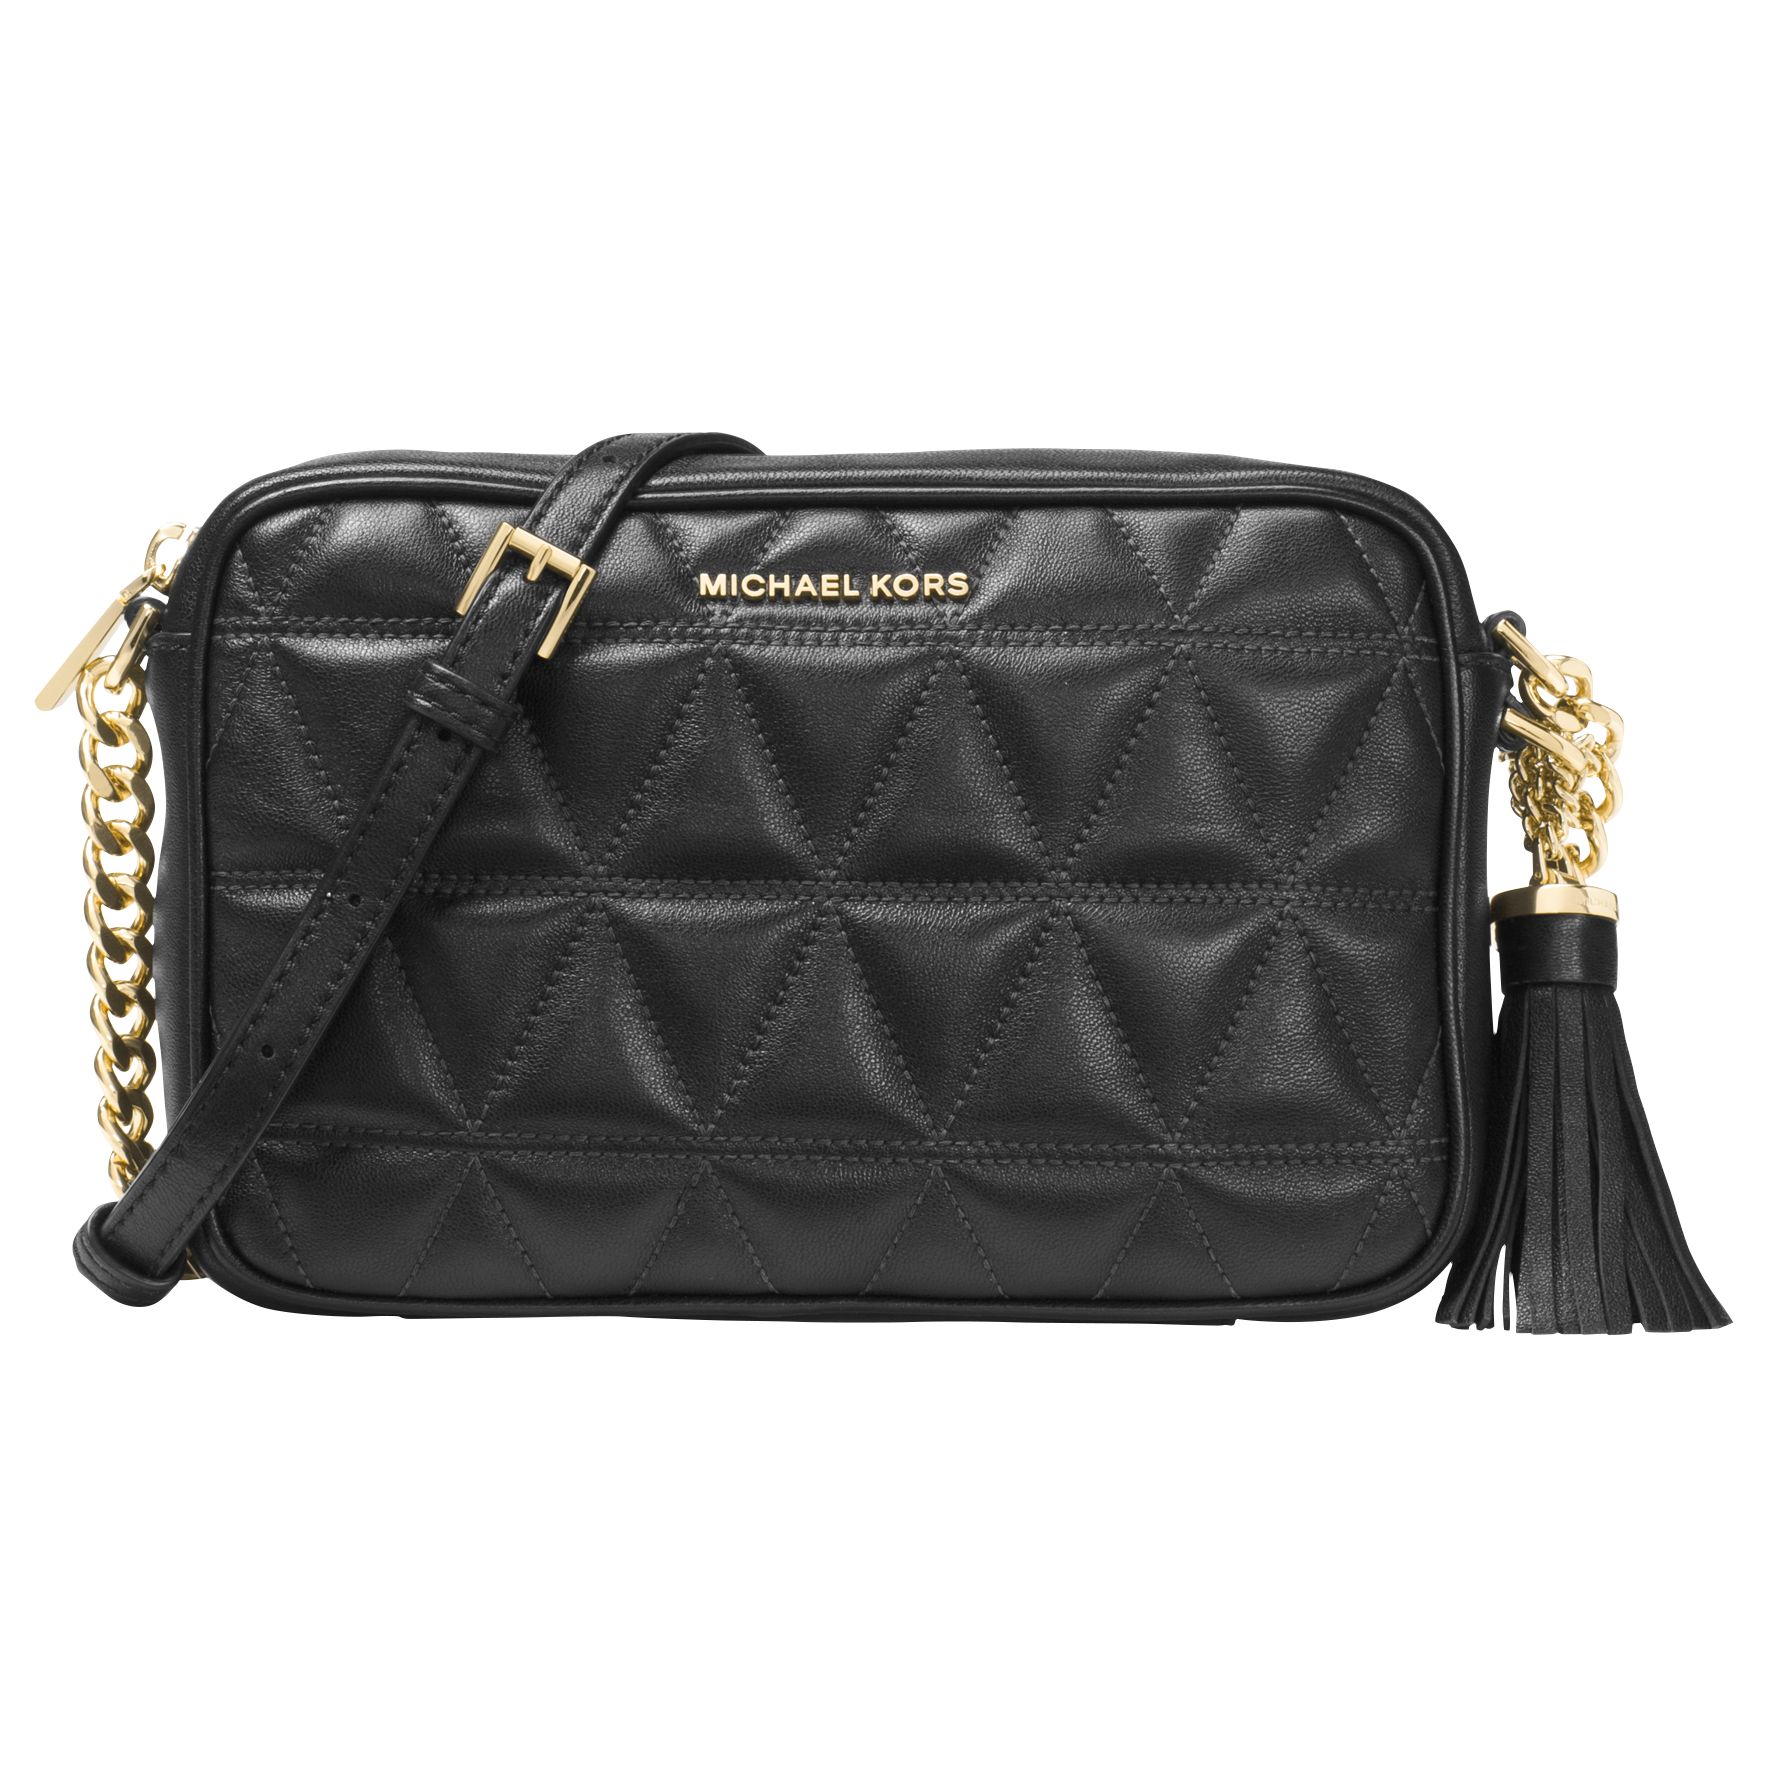 MICHAEL Michael Kors Ginny Quilted Leather Cross Body Camera Bag, Black at John Lewis & Partners